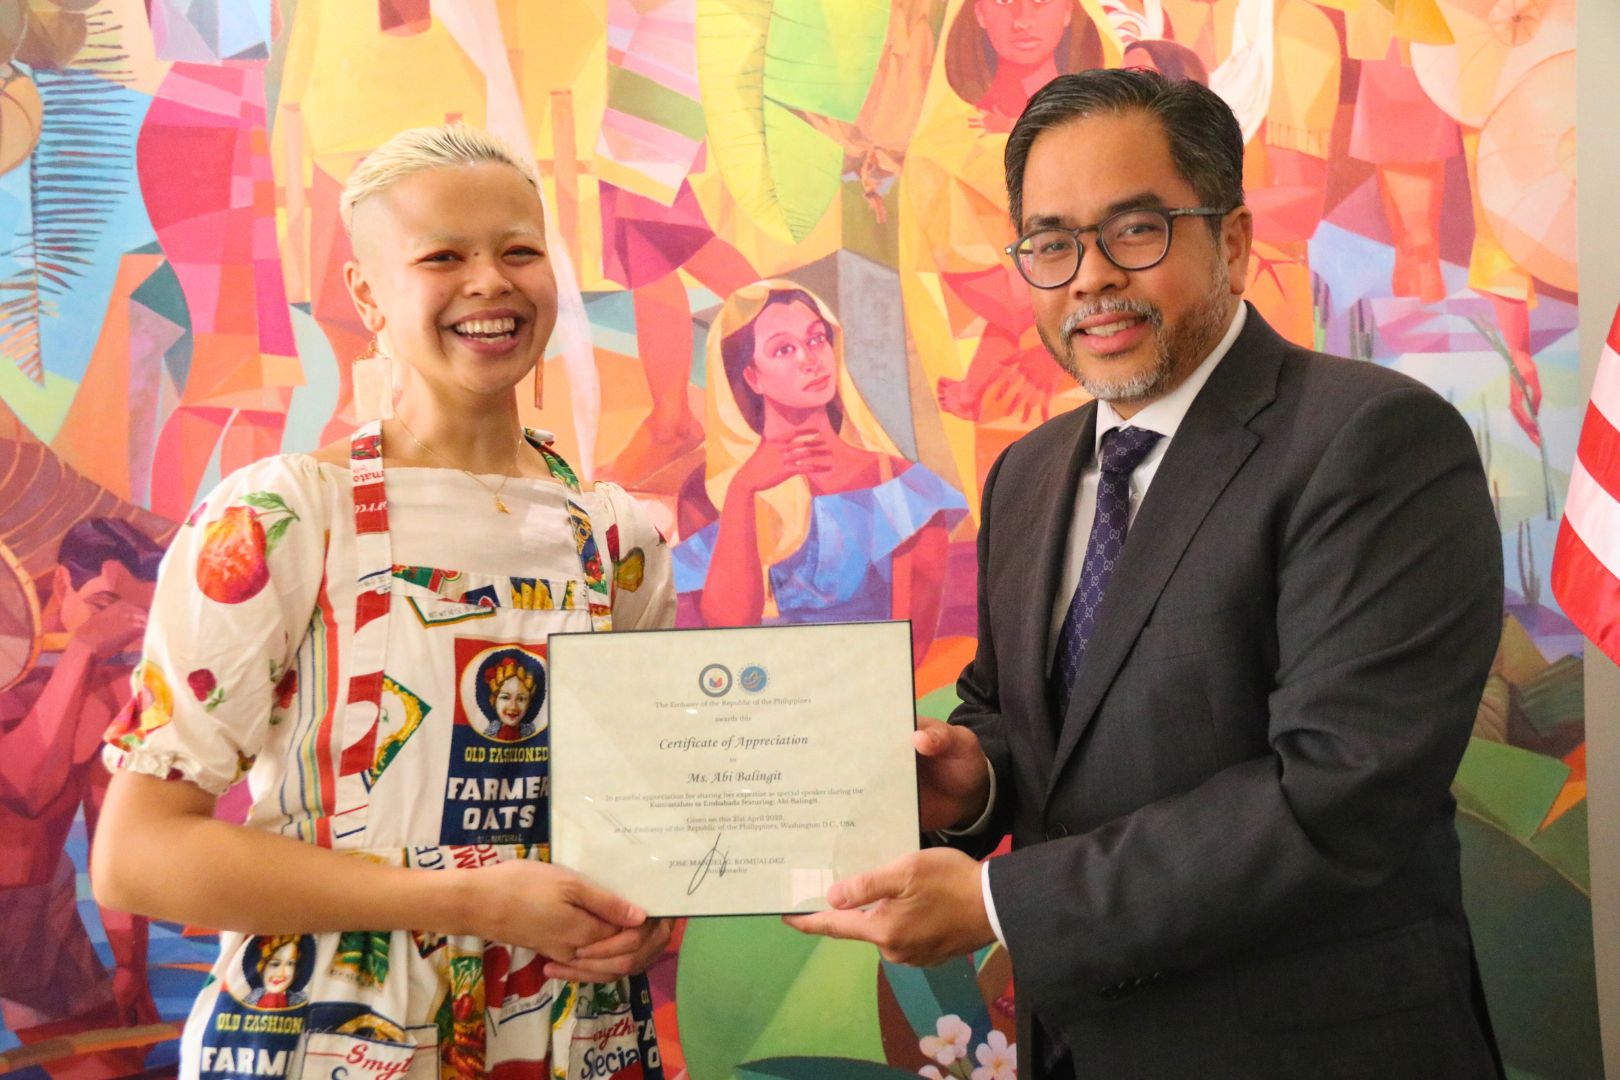 Deputy Chief of Mission Jaime Ramon T. Ascalon, Jr. (right) hands over a Certificate of Appreciation to Ms. Abi Balingit (left).